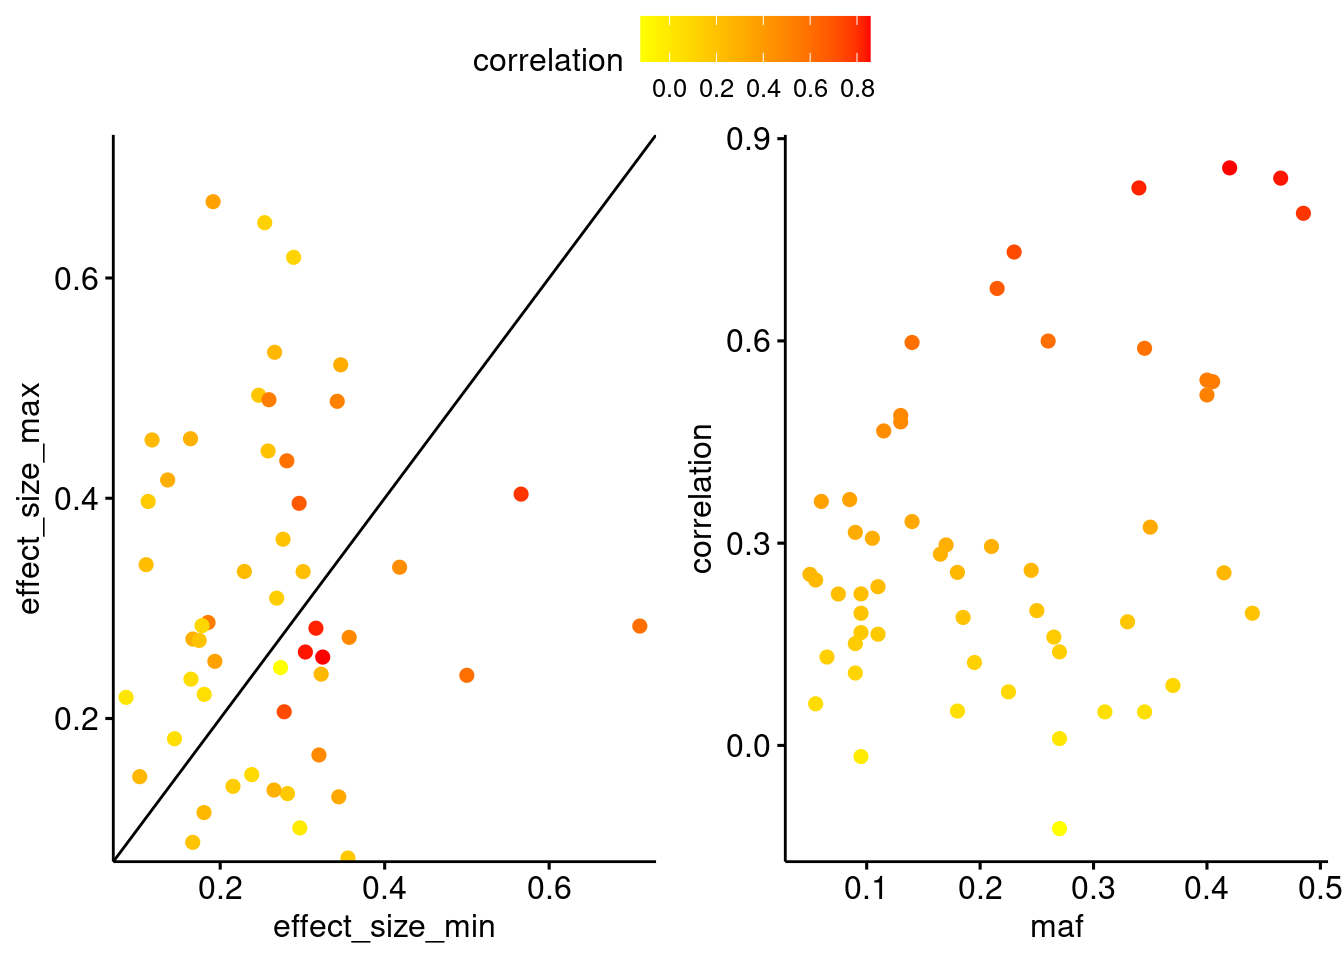 Characteristics of coregulated genes by the degree of gene expression correlation. Left plot shows the simulated eQTL effect size for each pair (x-axis shows the minimum and y-axis shows the maximum), with genes with higher expression correlation in red. Genes pairs along the diagonal represent those where the same eSNP has a similar effect size on both genes. Right plot shows the relationship between the minor allele frequency of the eSNP and the gene expression correlation.